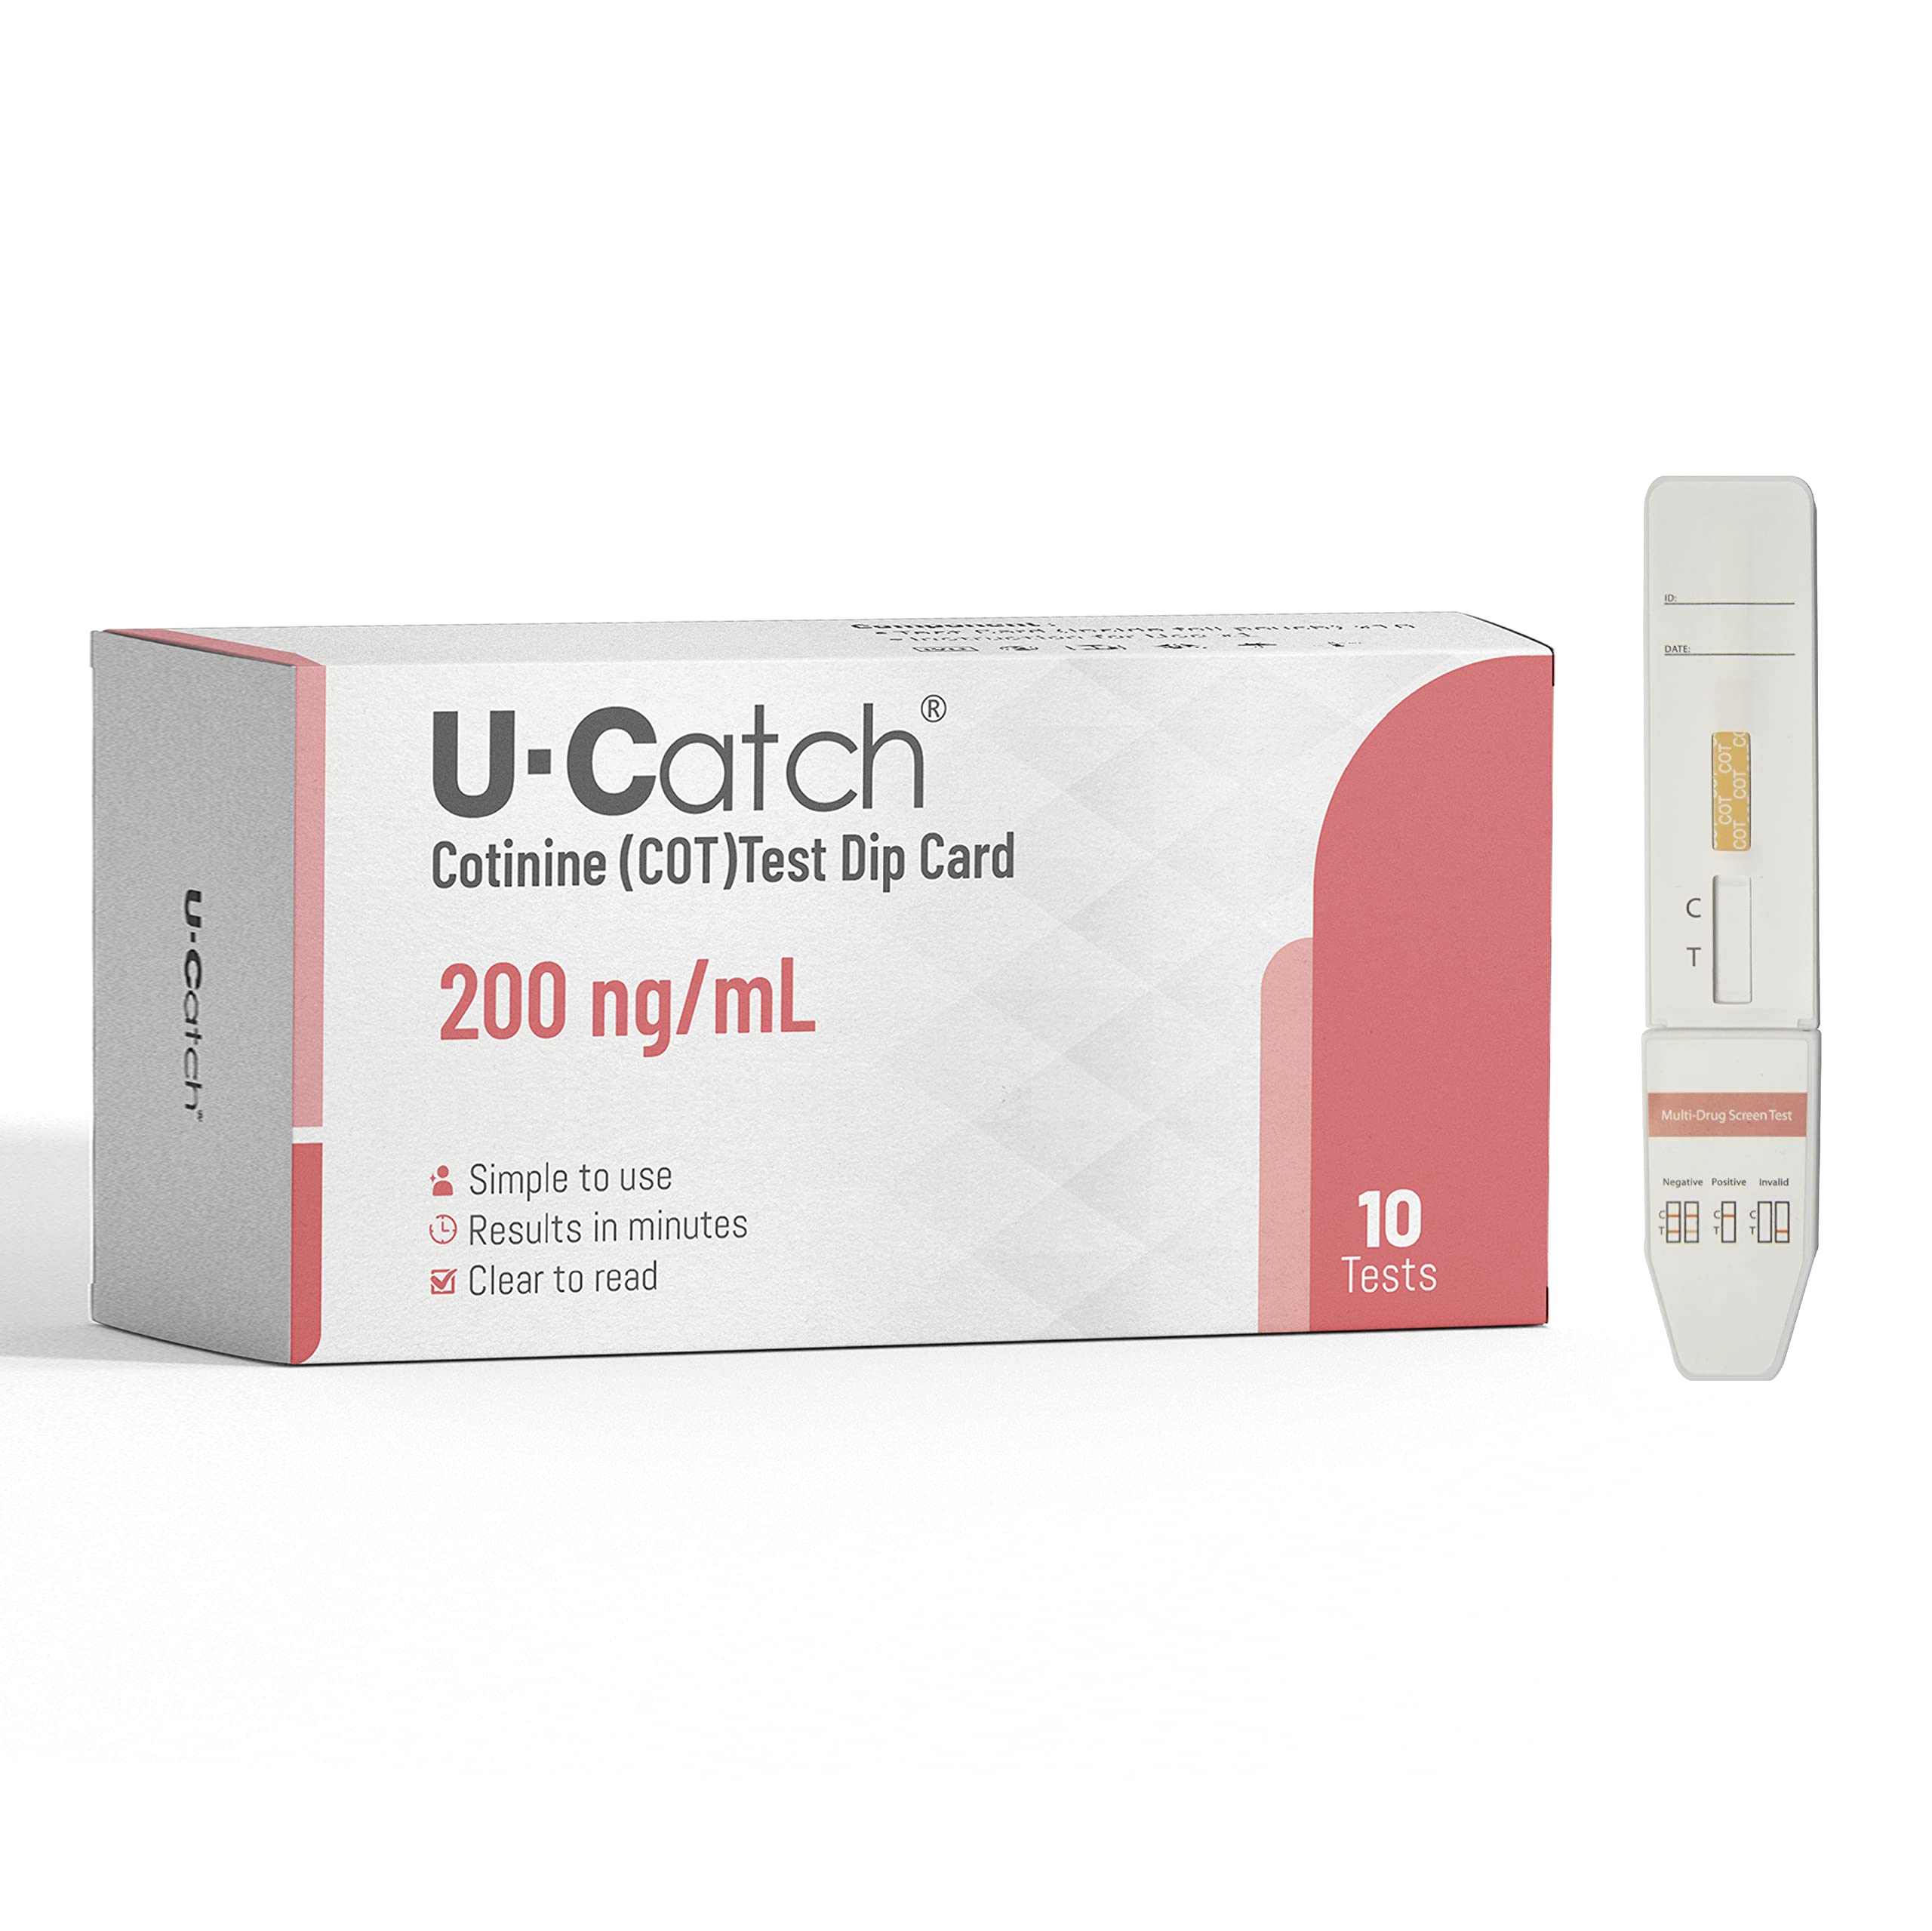 Nicotine test in urine - Cut-Off 200 ng/mL